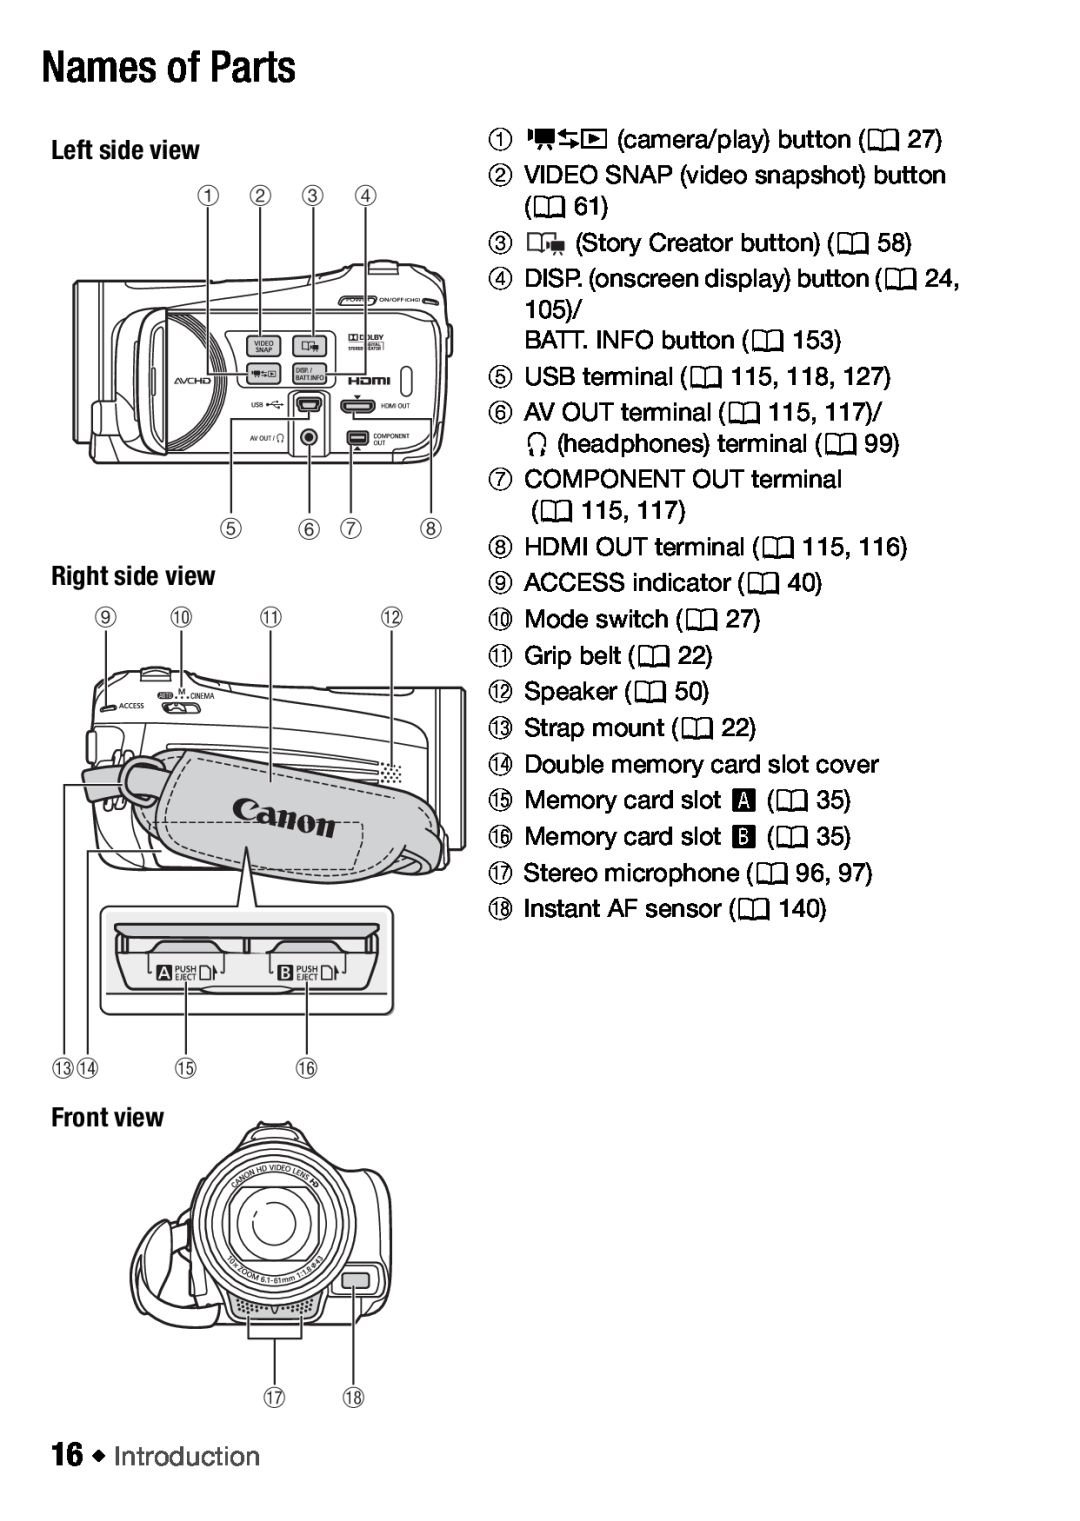 Canon HFM406 Names of Parts, Left side view, Right side view, Front view, 16 Š Introduction, 1 2 3 5 6 7, Aq Aa, dAf Ag Ah 